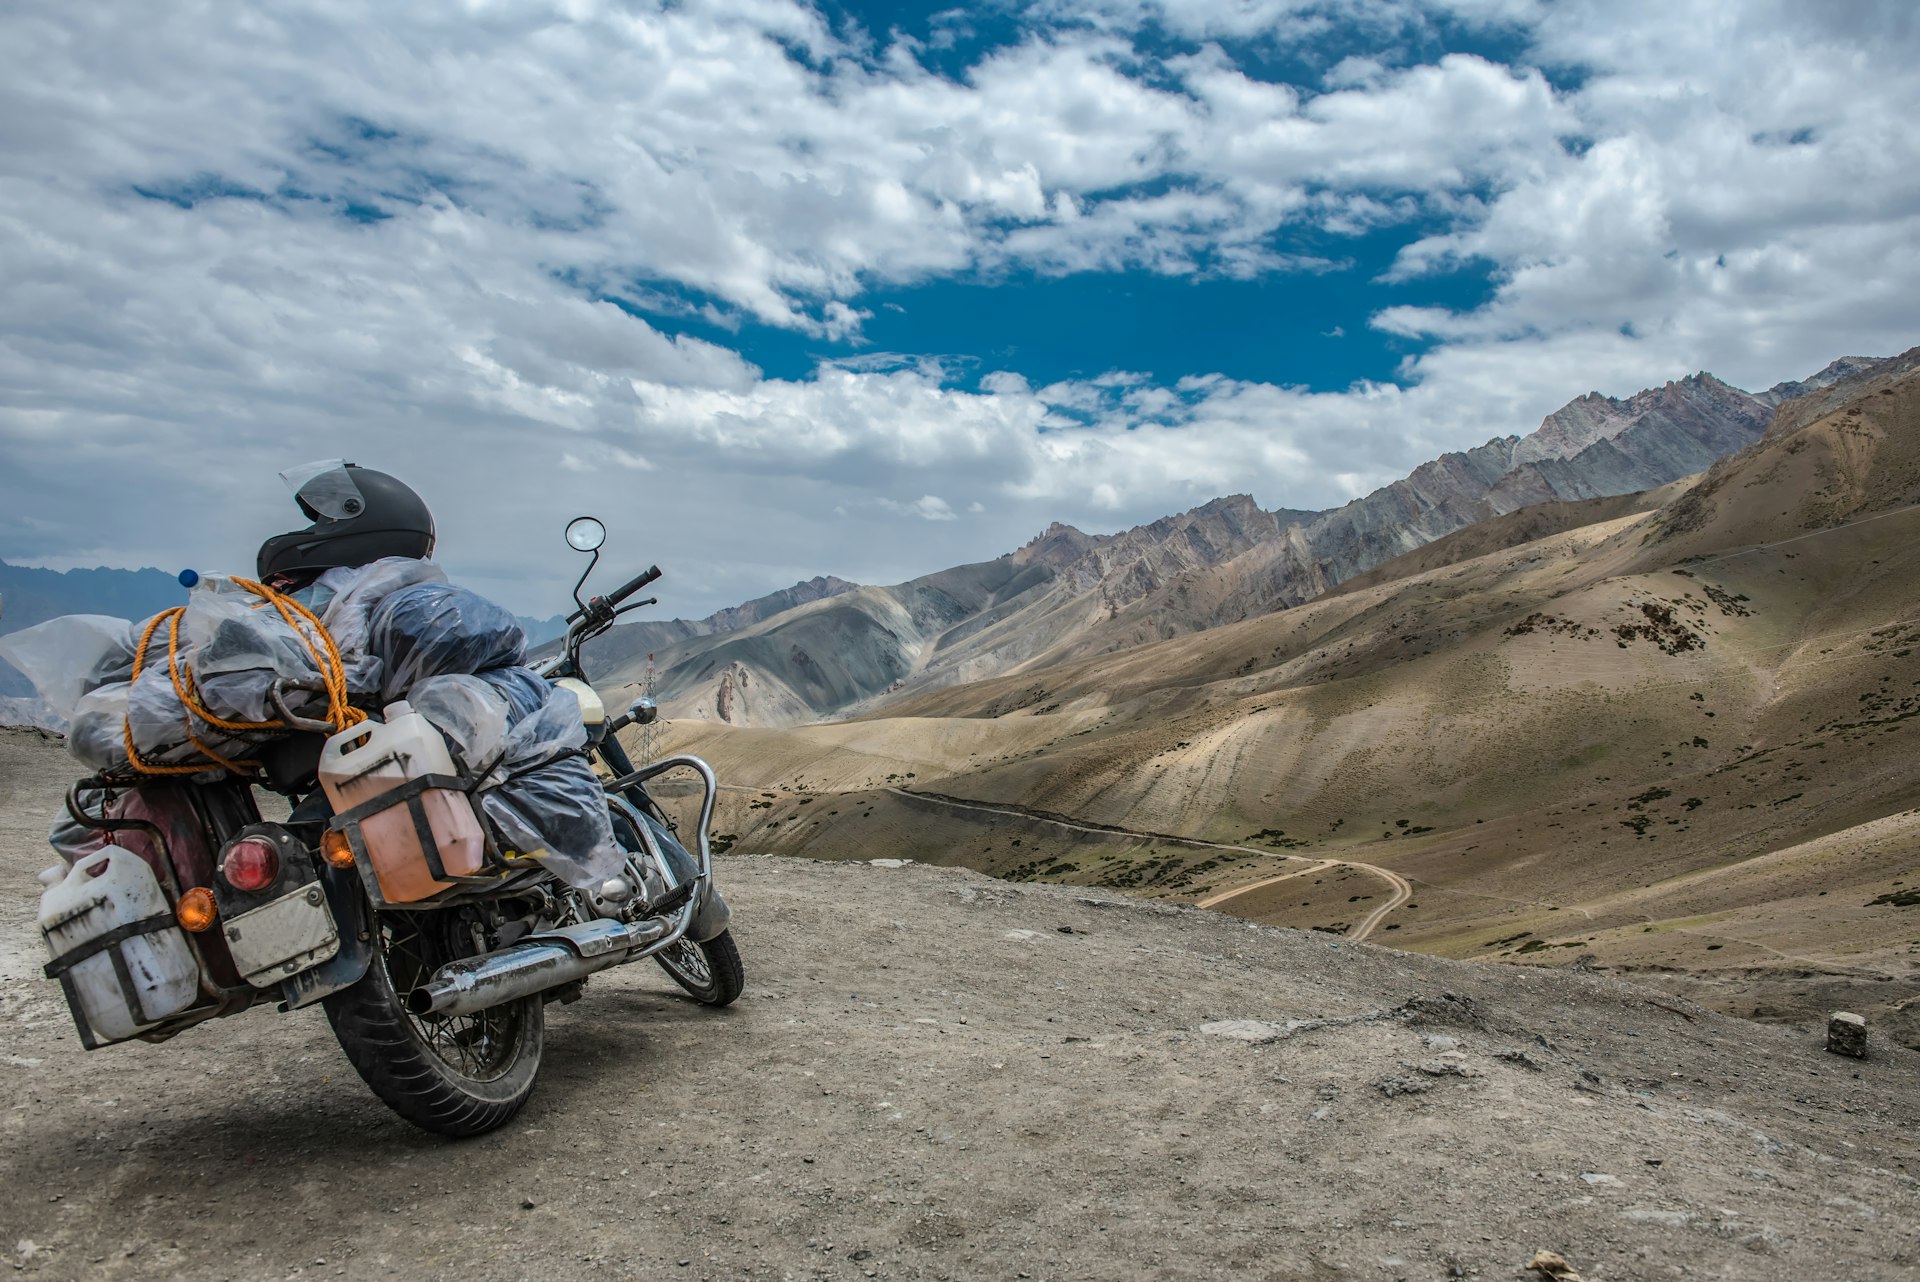 A heavily loaded motorbike in the arid high-altitude mountains around Leh, India